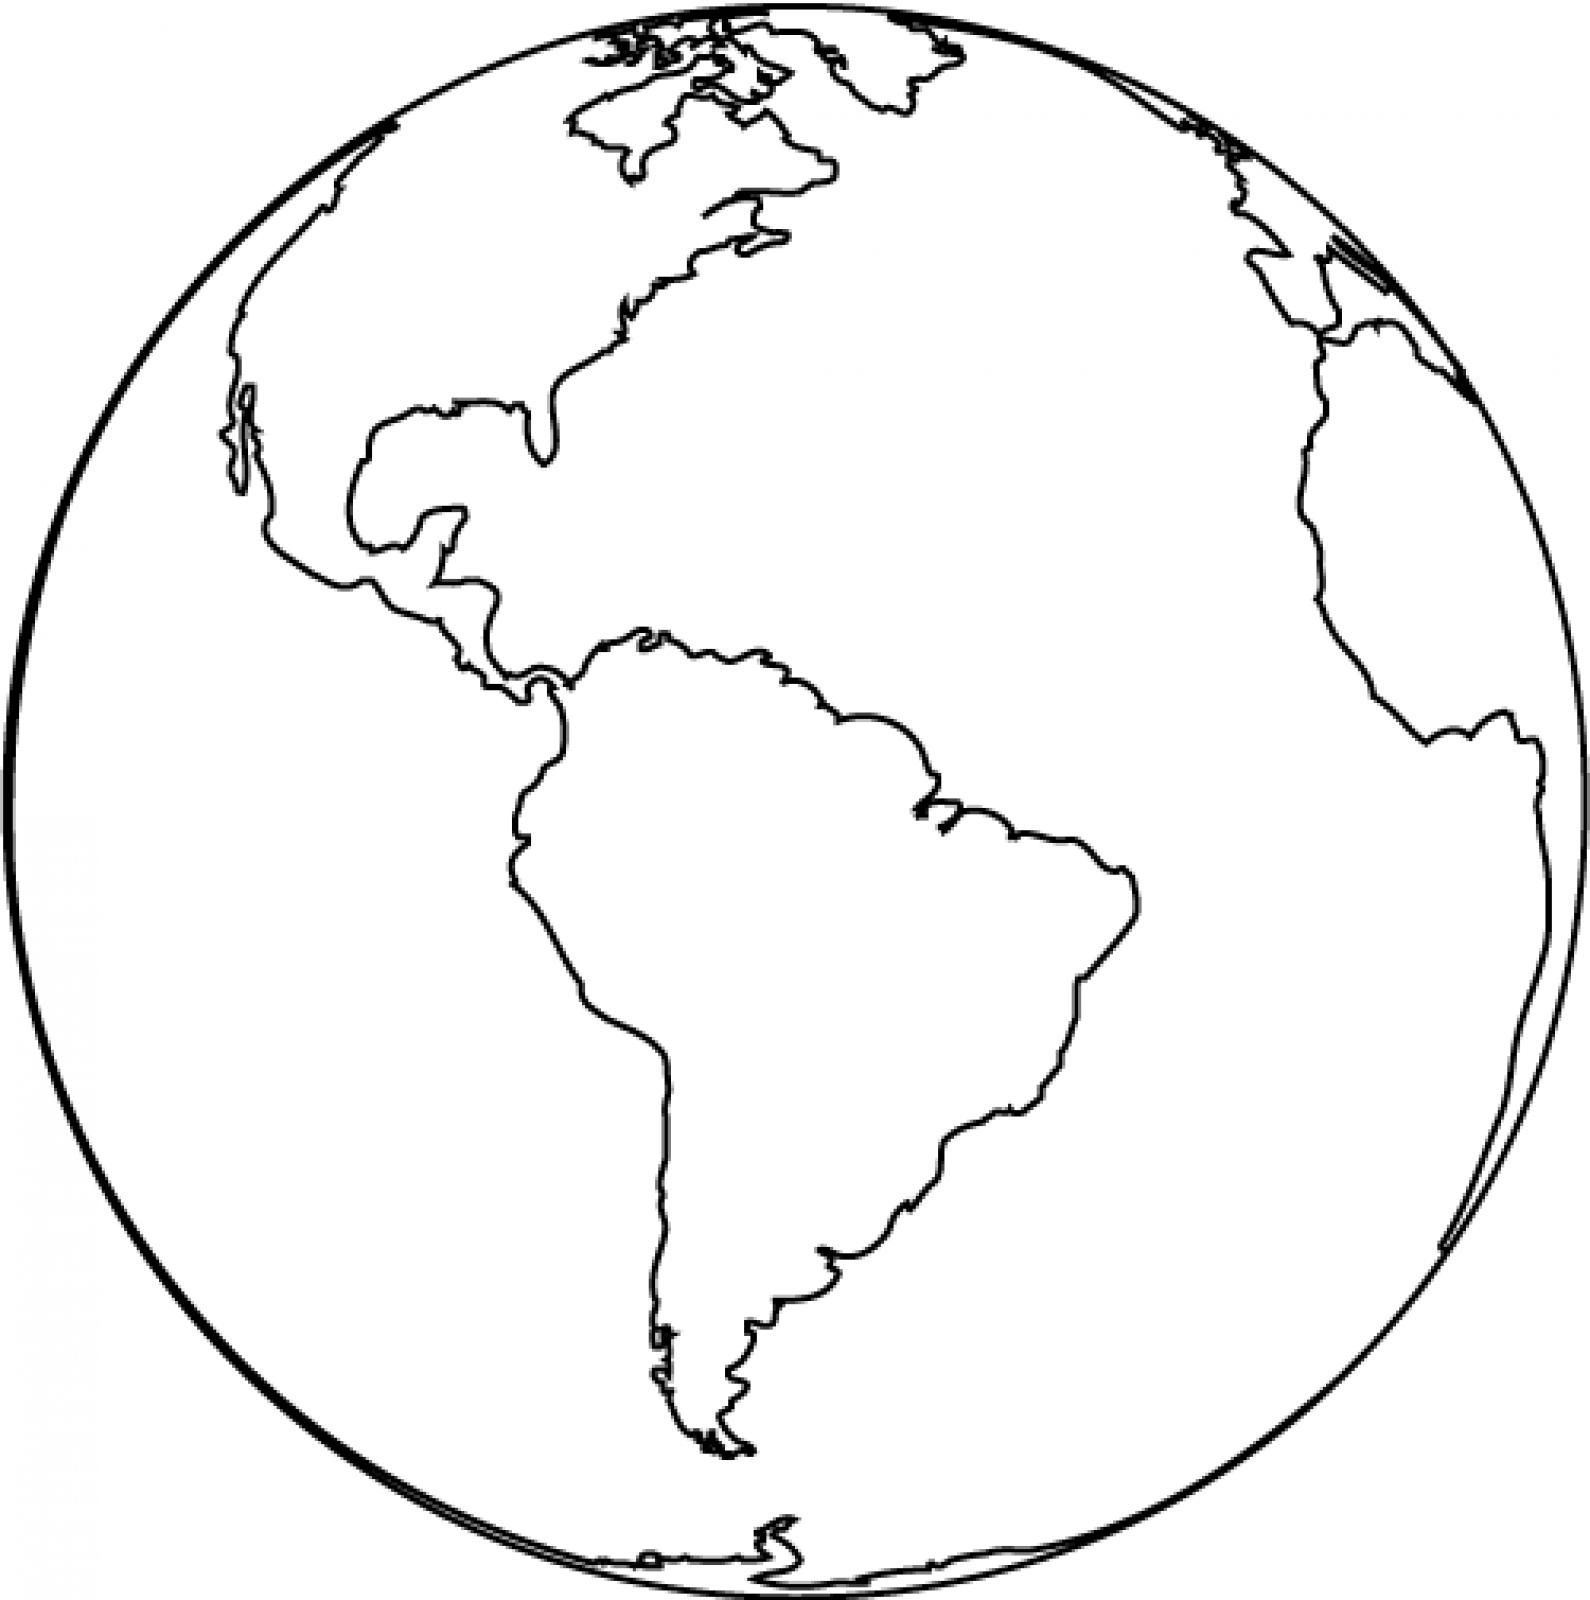 Coloring Pages Of The World World Map Coloring Page Coloring Pages World Coloring Pages